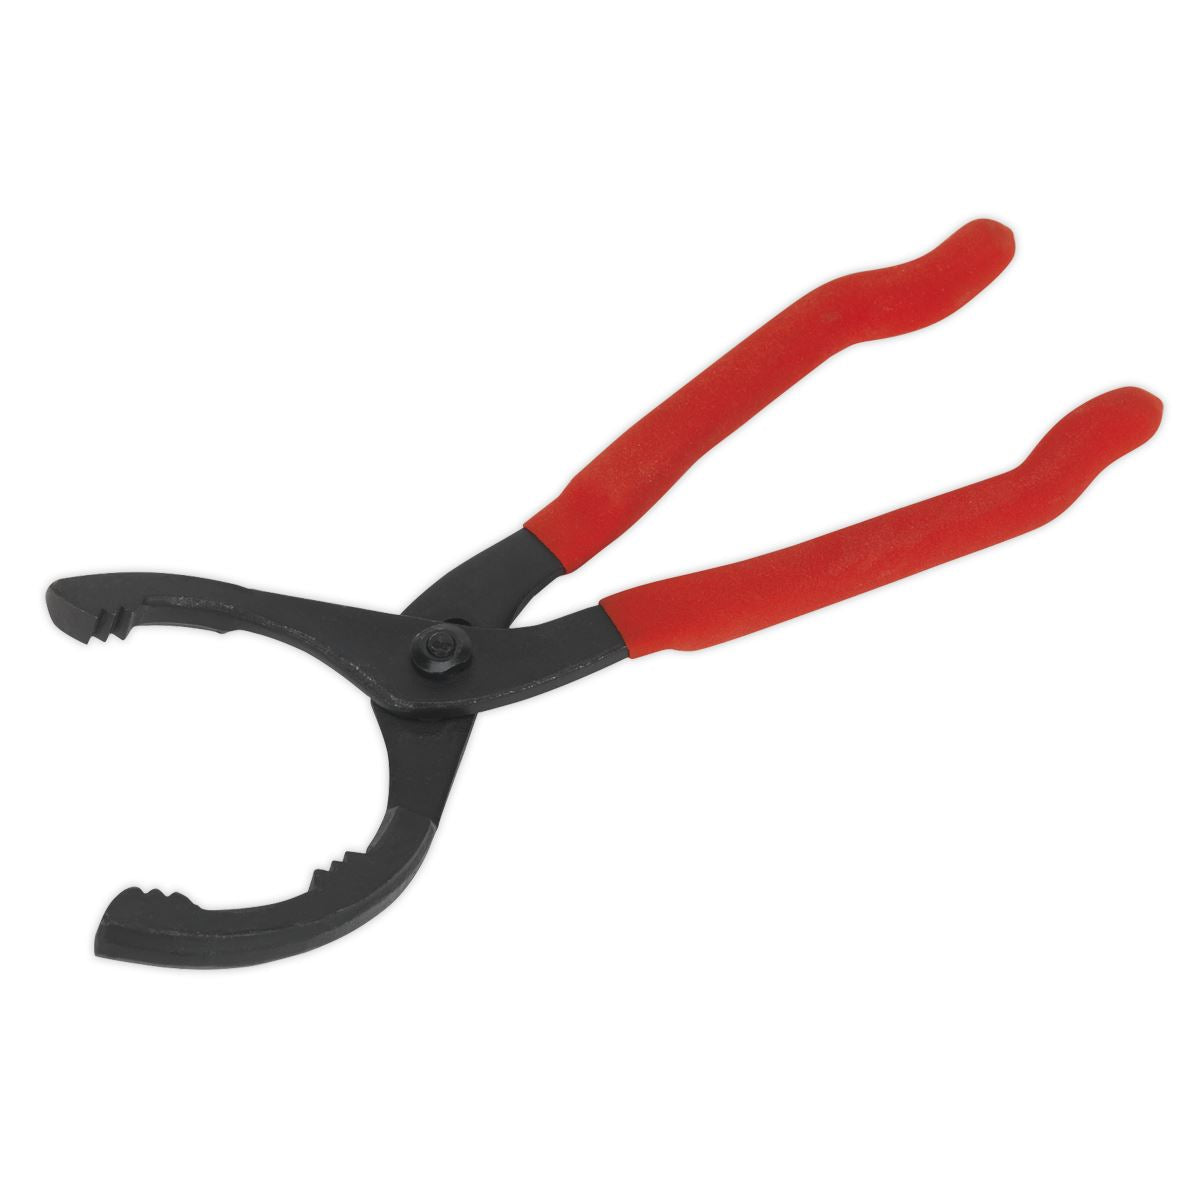 Sealey Oil Filter Pliers 60-108mm Capacity Car Service Tools Wrench